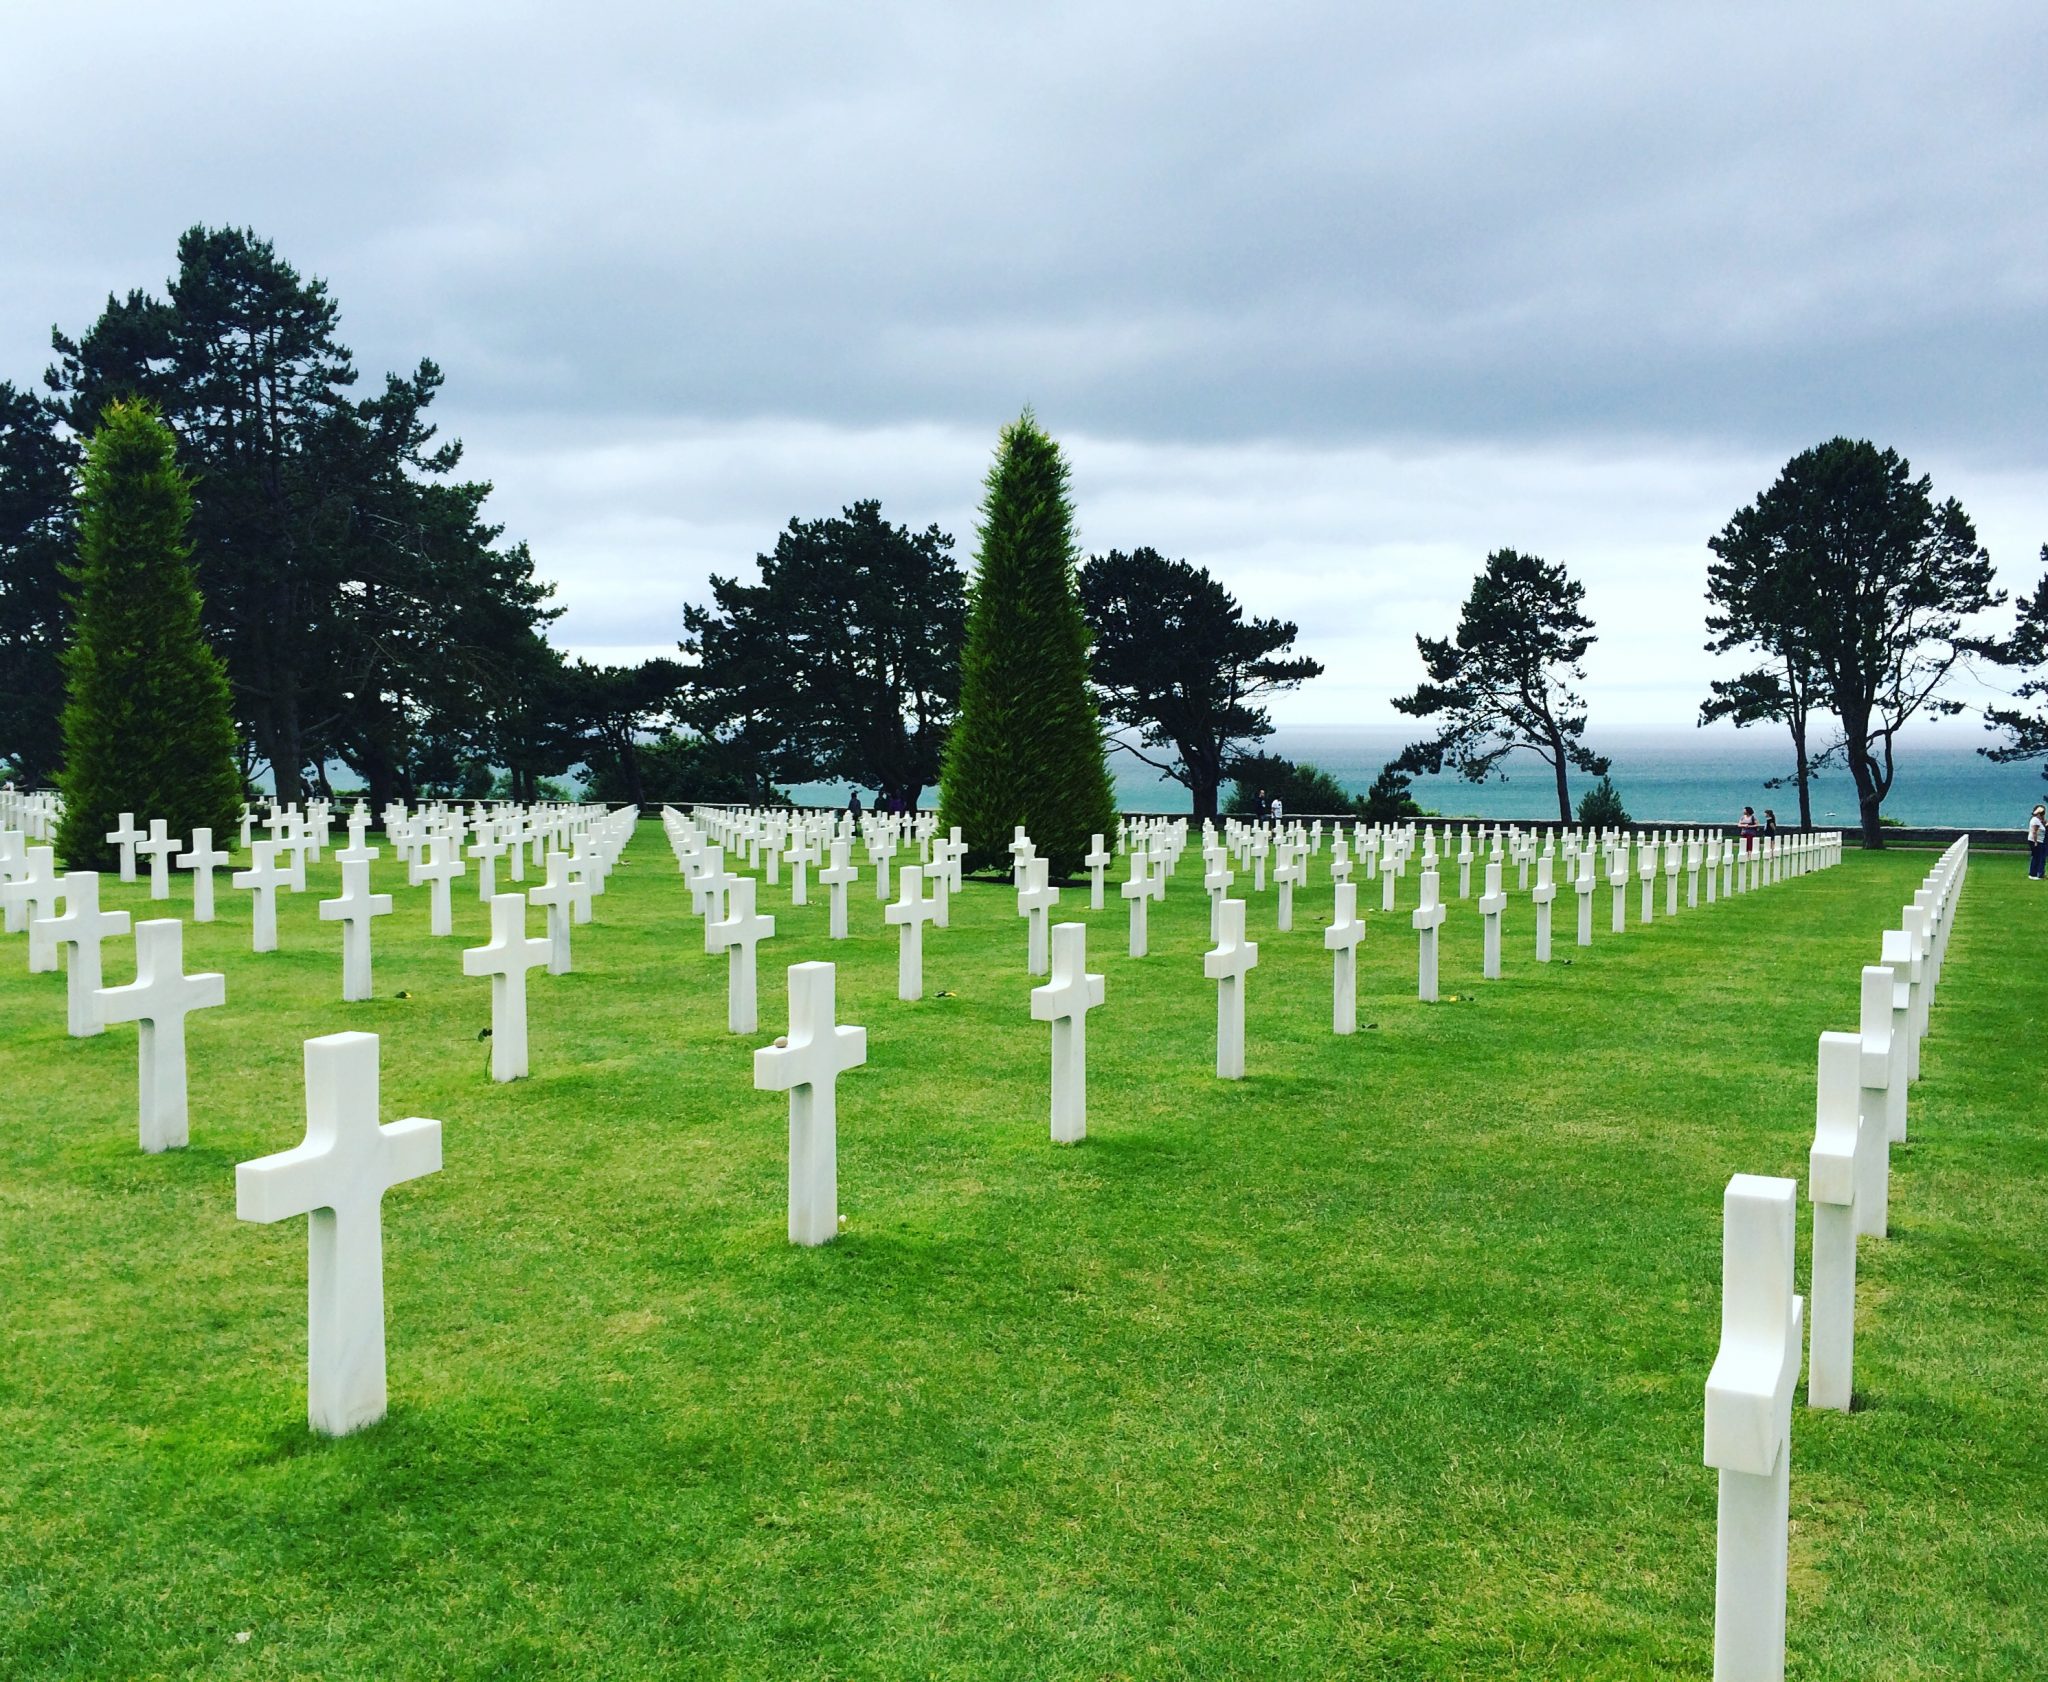 Experiencing D-Day in Normandy